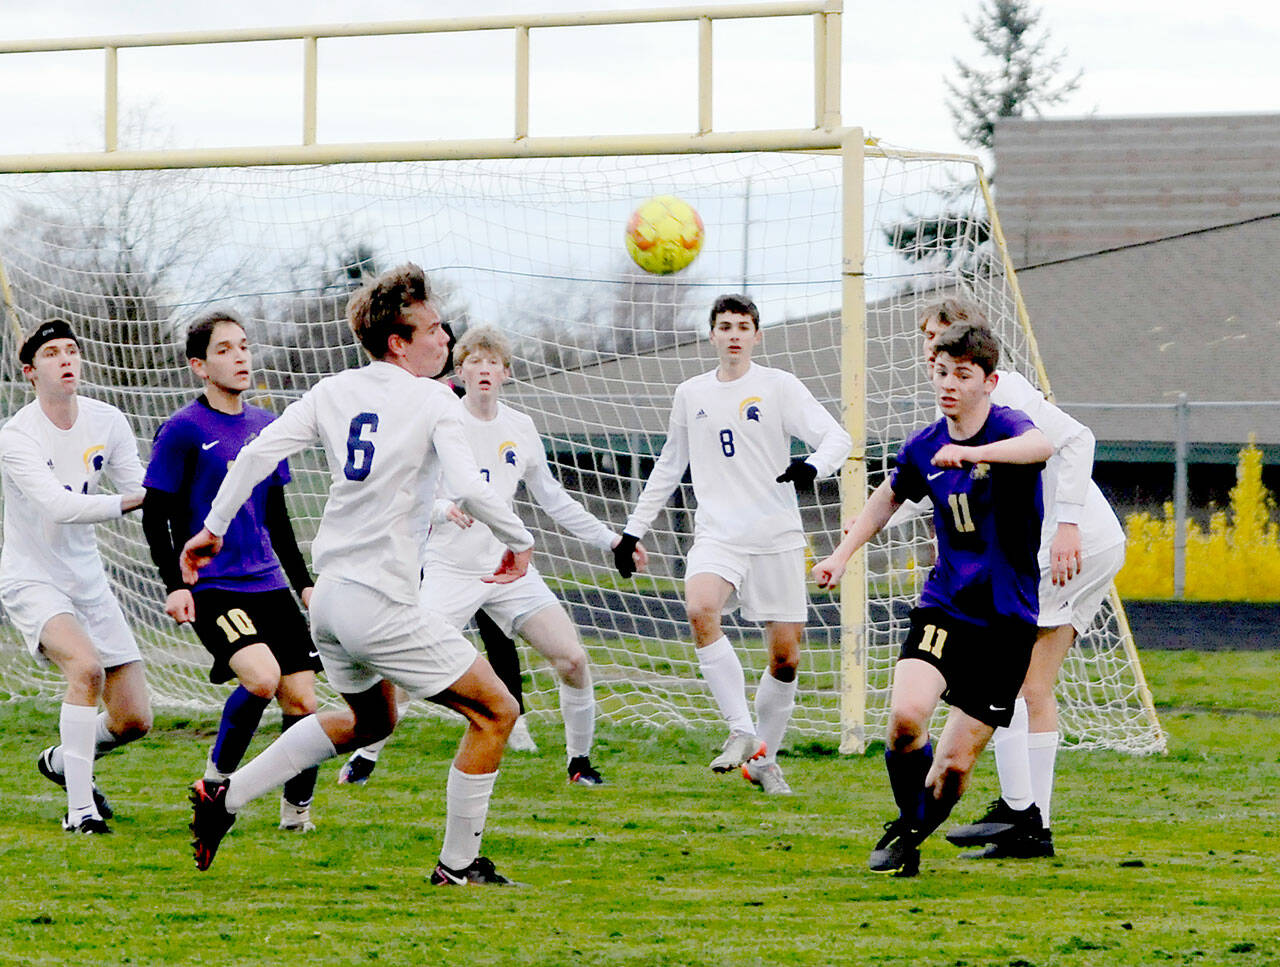 Sequim’s Ethan Knight, right, is surrounded by Bainbridge defenders near the Spartans’ goal box during the Wolves’ 3-0 loss on Tuesday. (Michael Dashiell/Olympic Peninsula News Group)